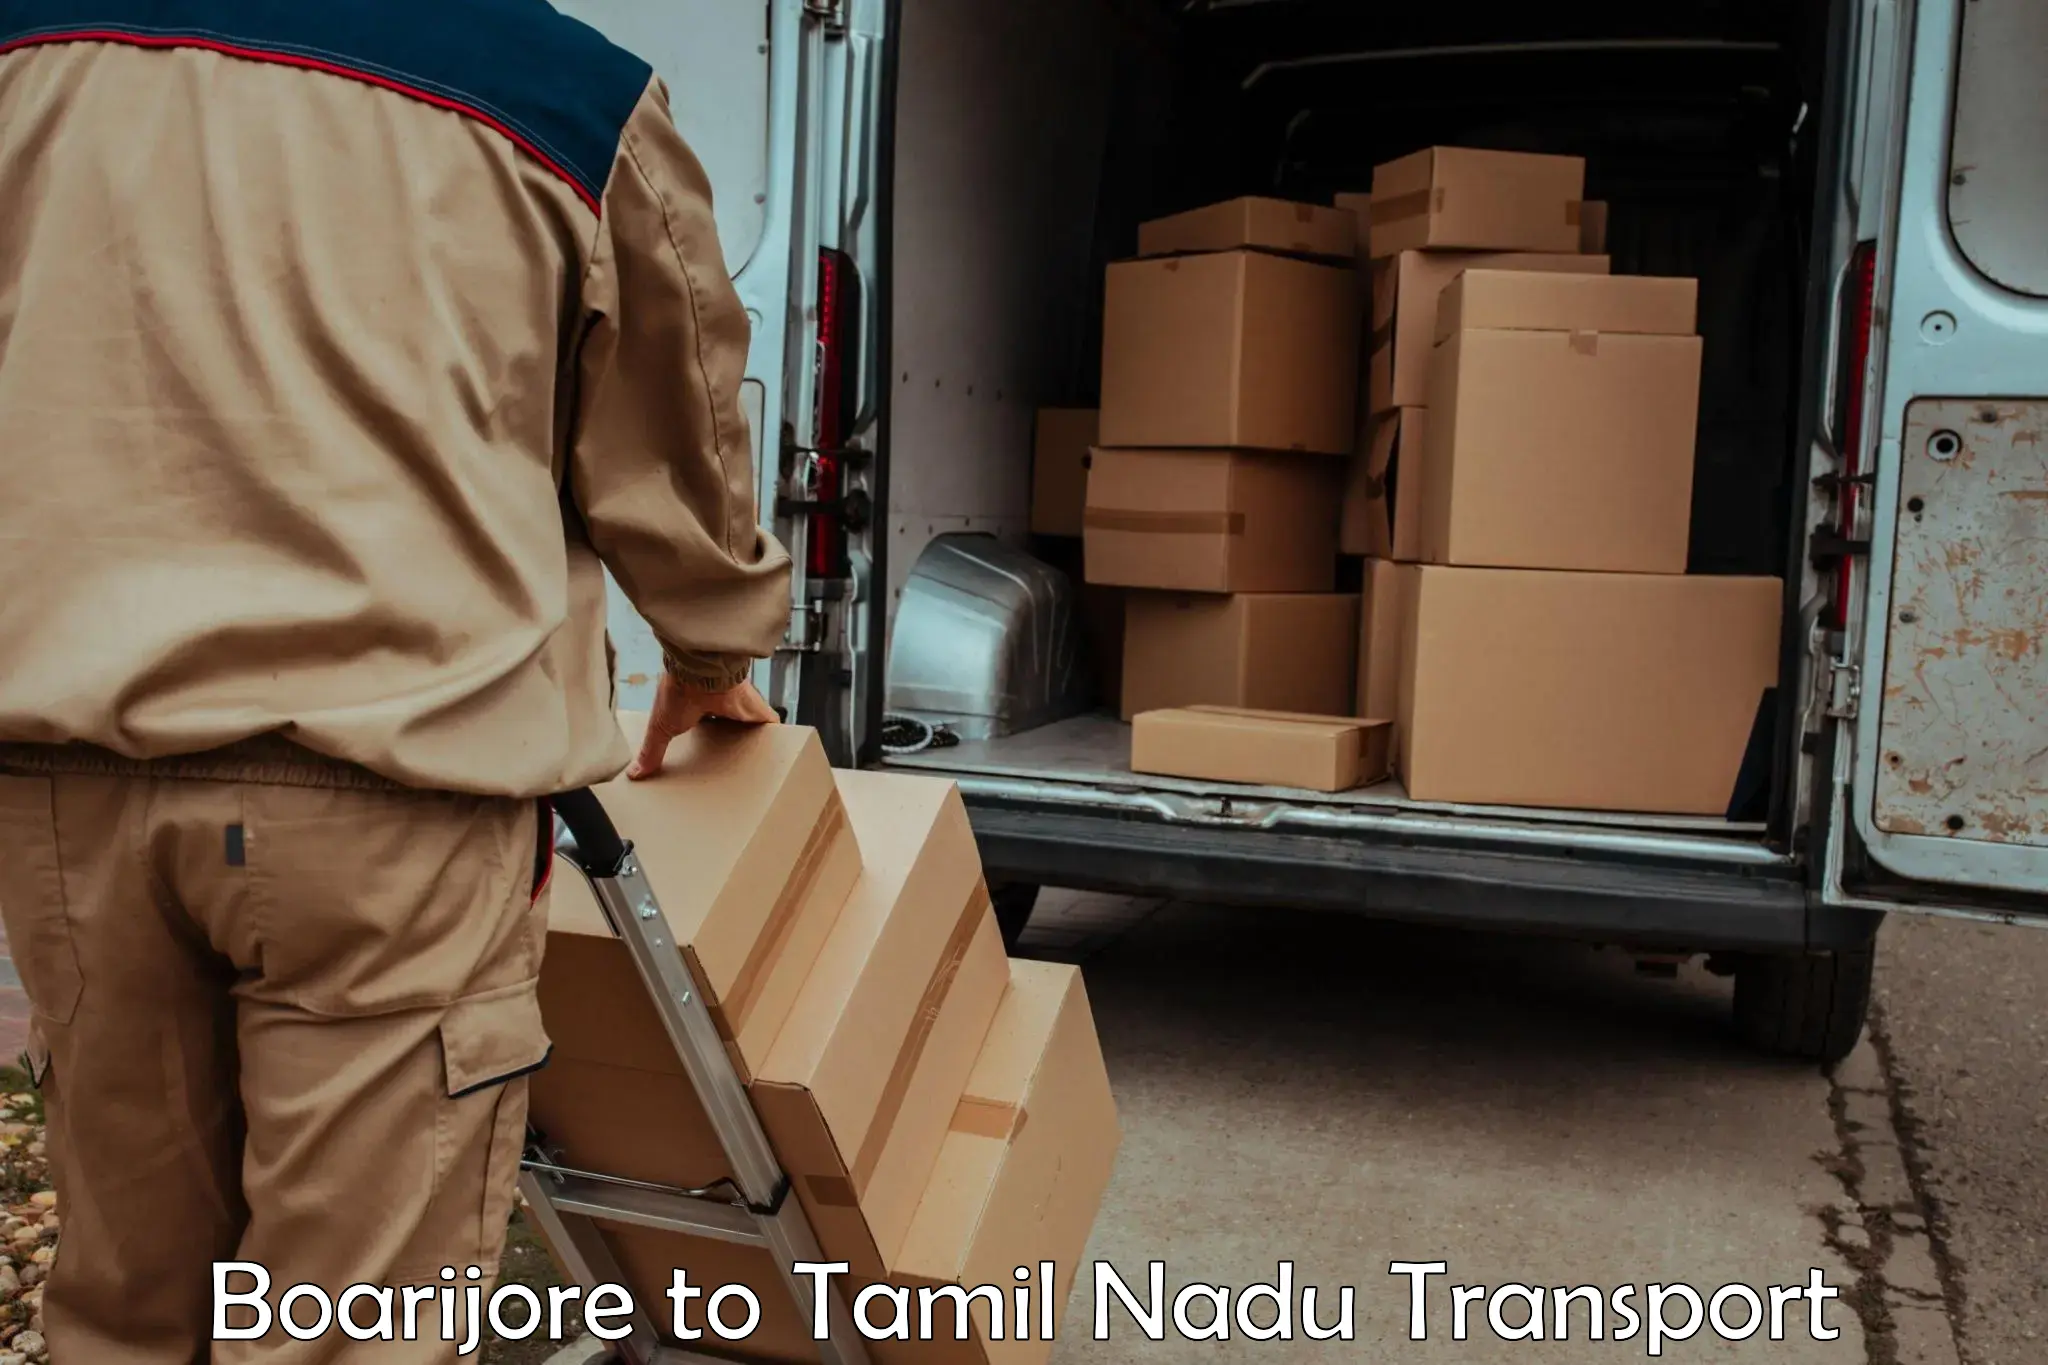 Transport bike from one state to another Boarijore to Tamil Nadu